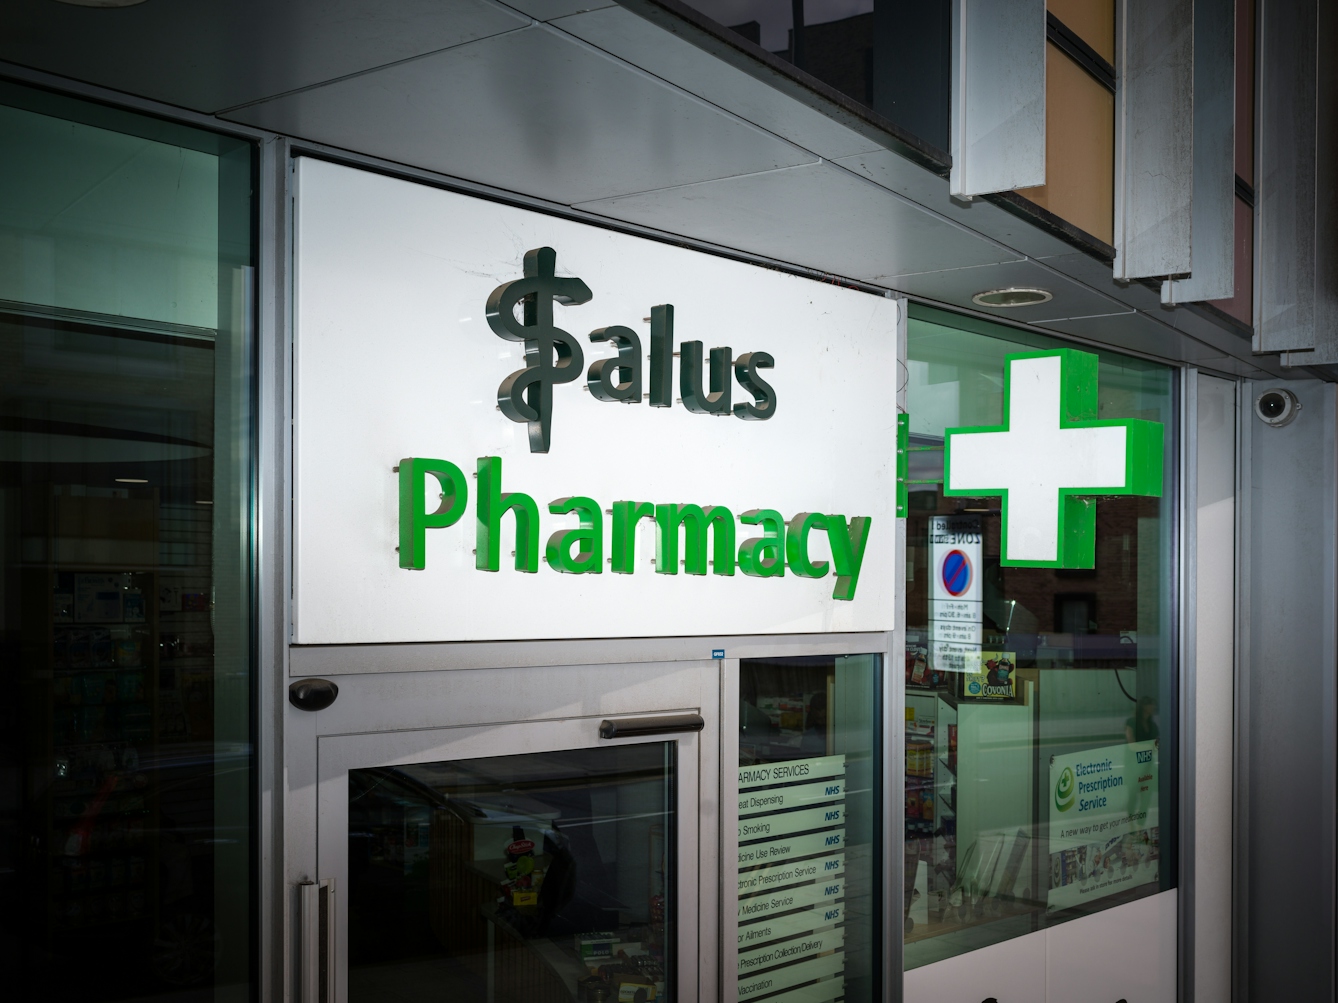 Shop front for the Salus pharmacy, London